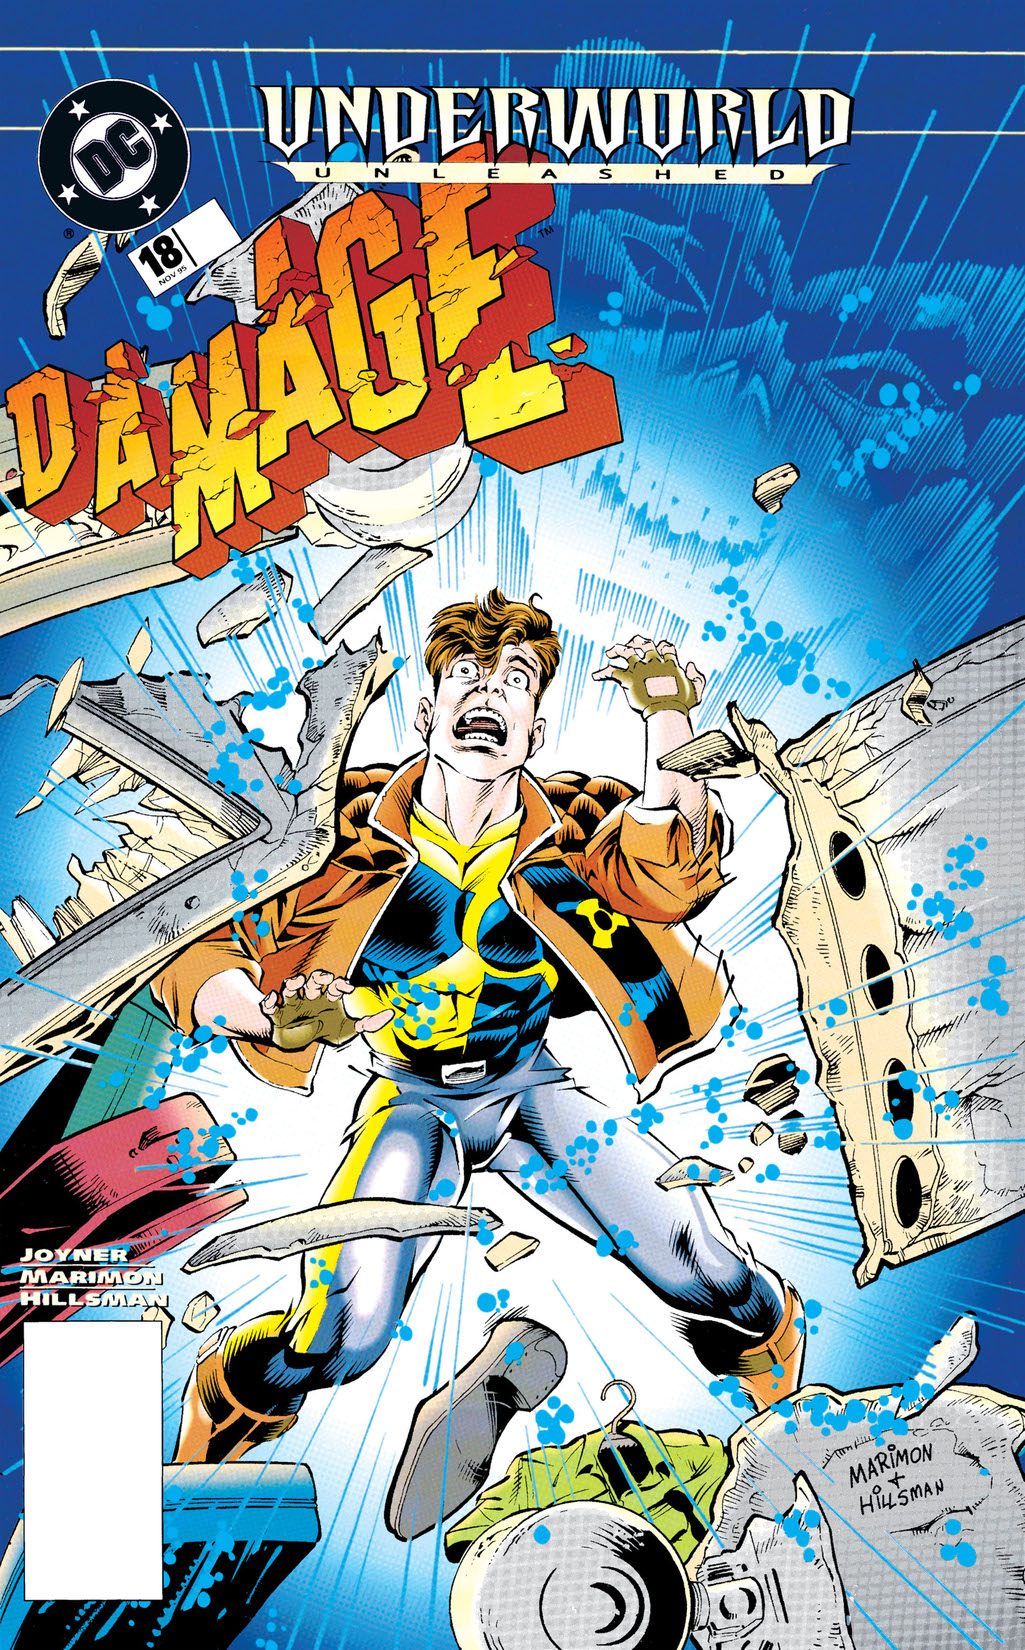 Damage (1994-) #18 preview images